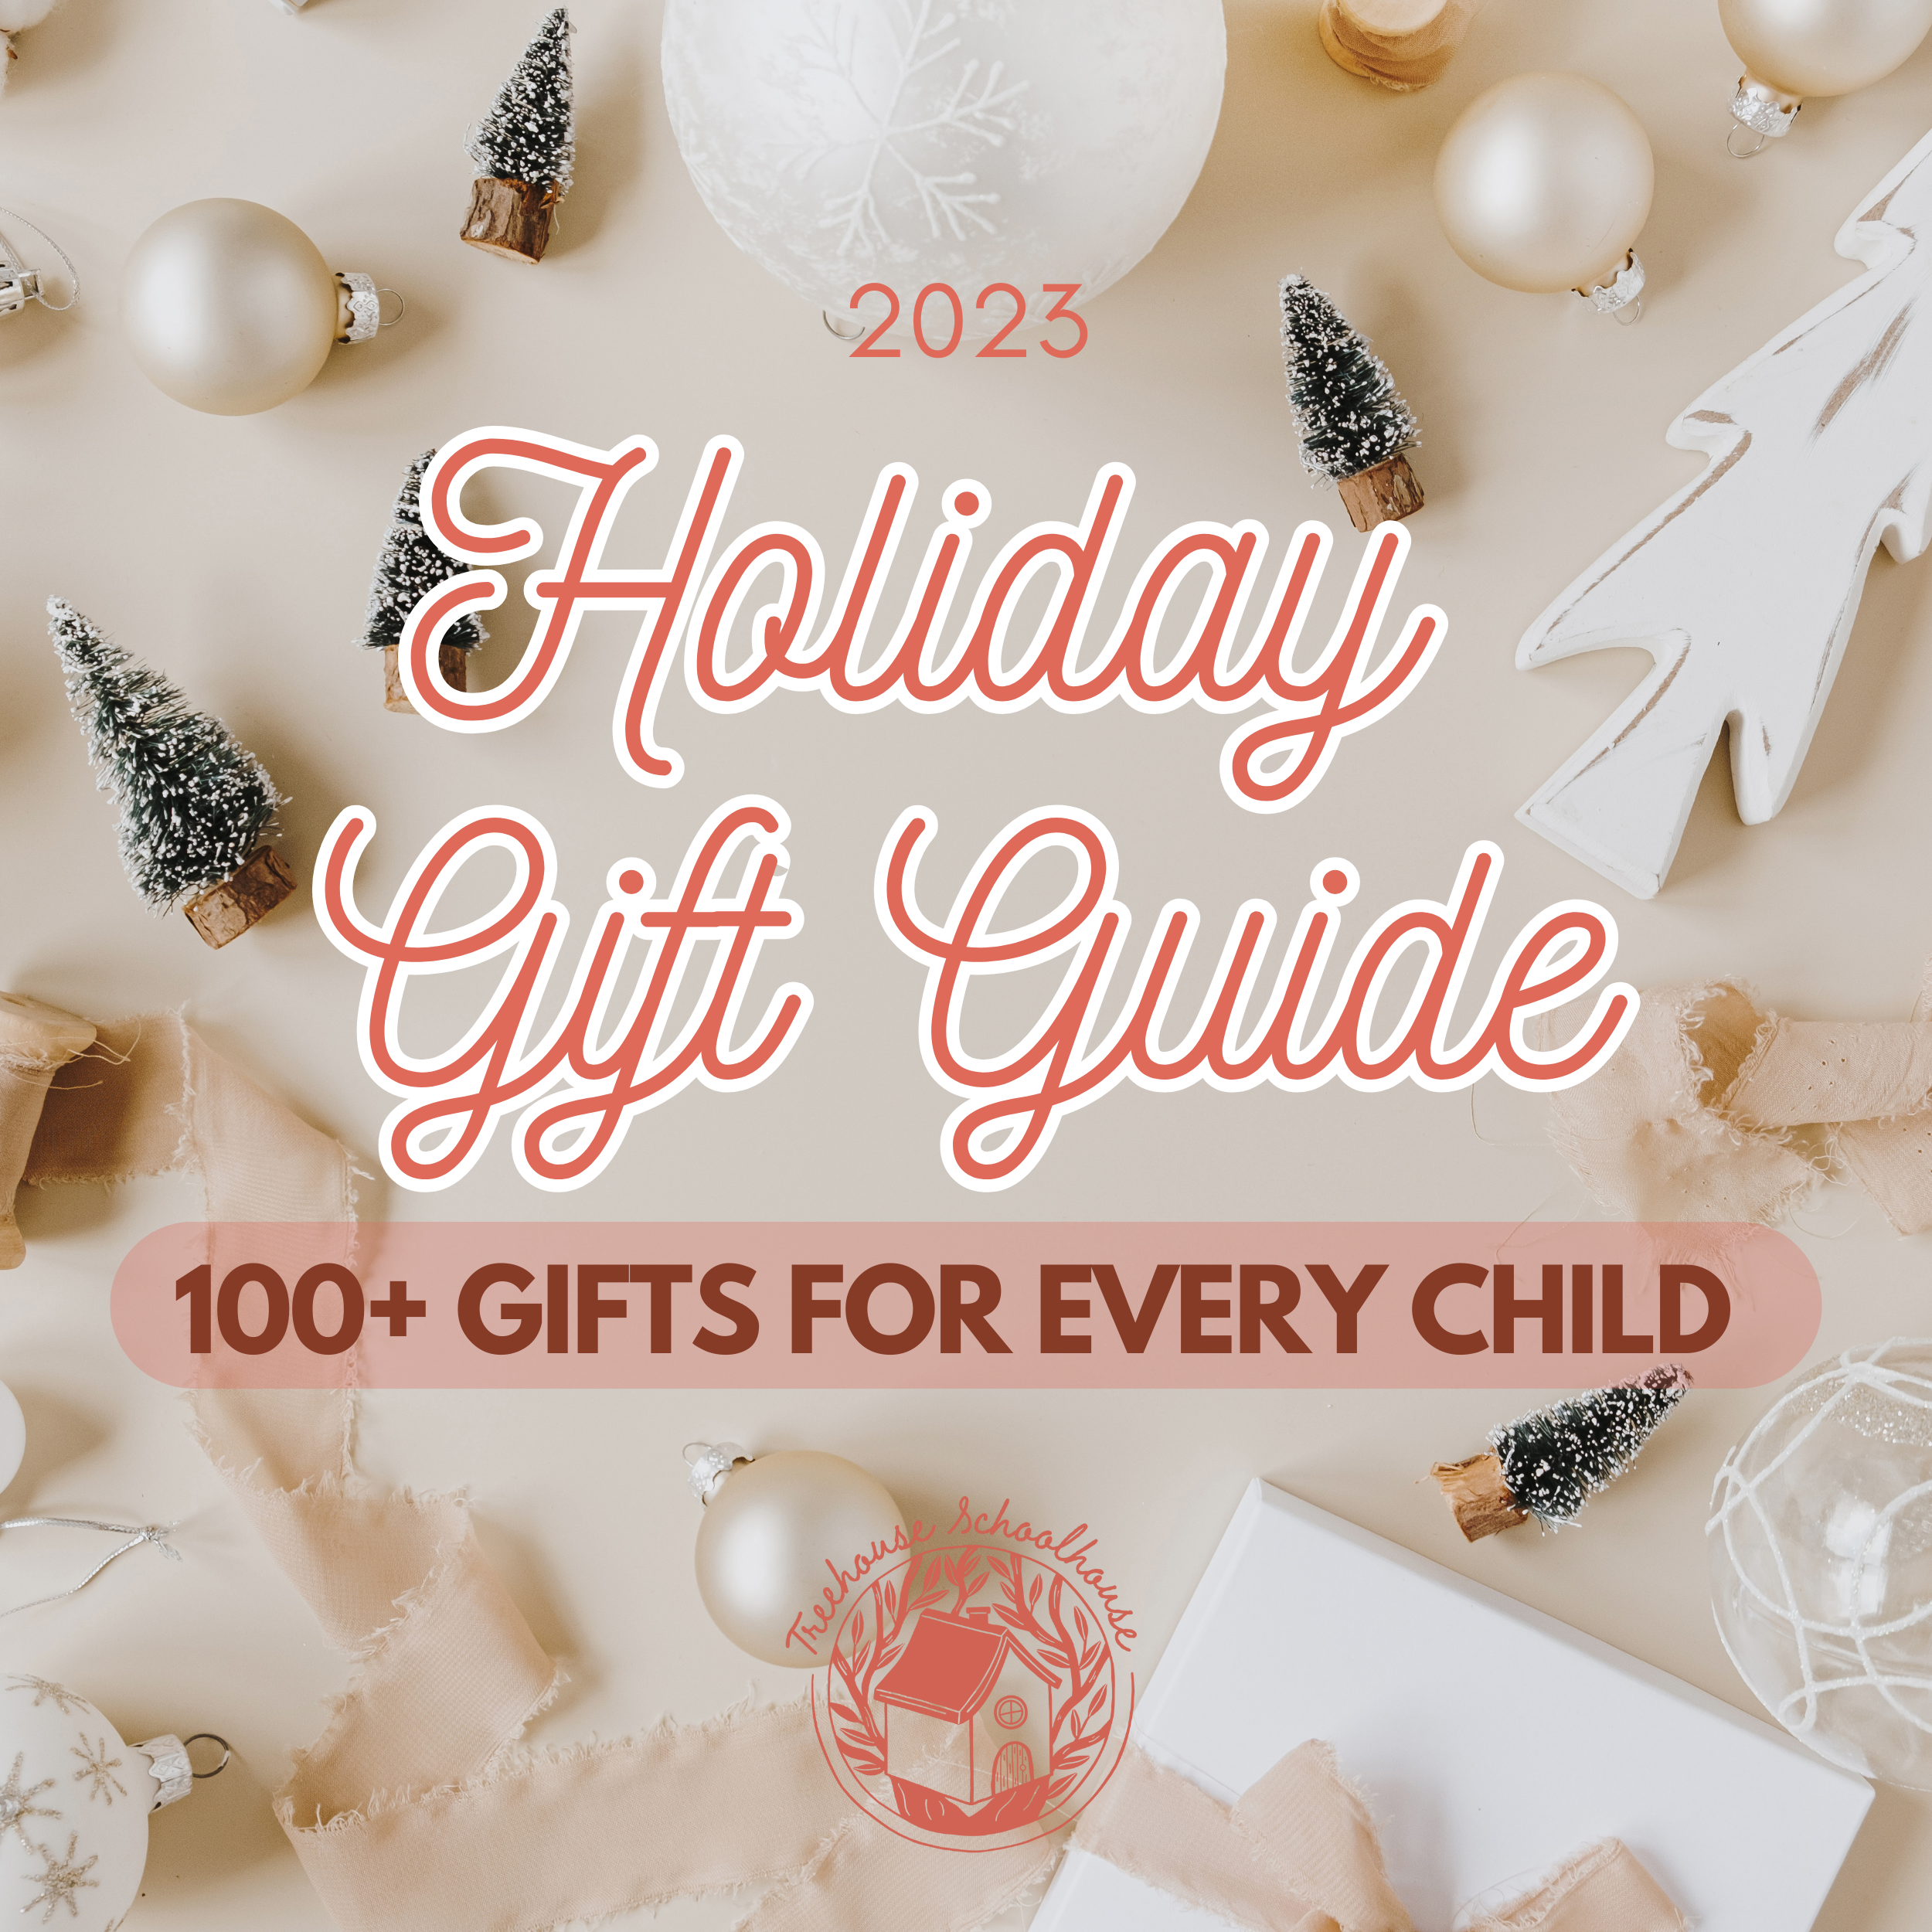 2022 Holiday Gift Guide: Gifts for Kids — House by the Preserve